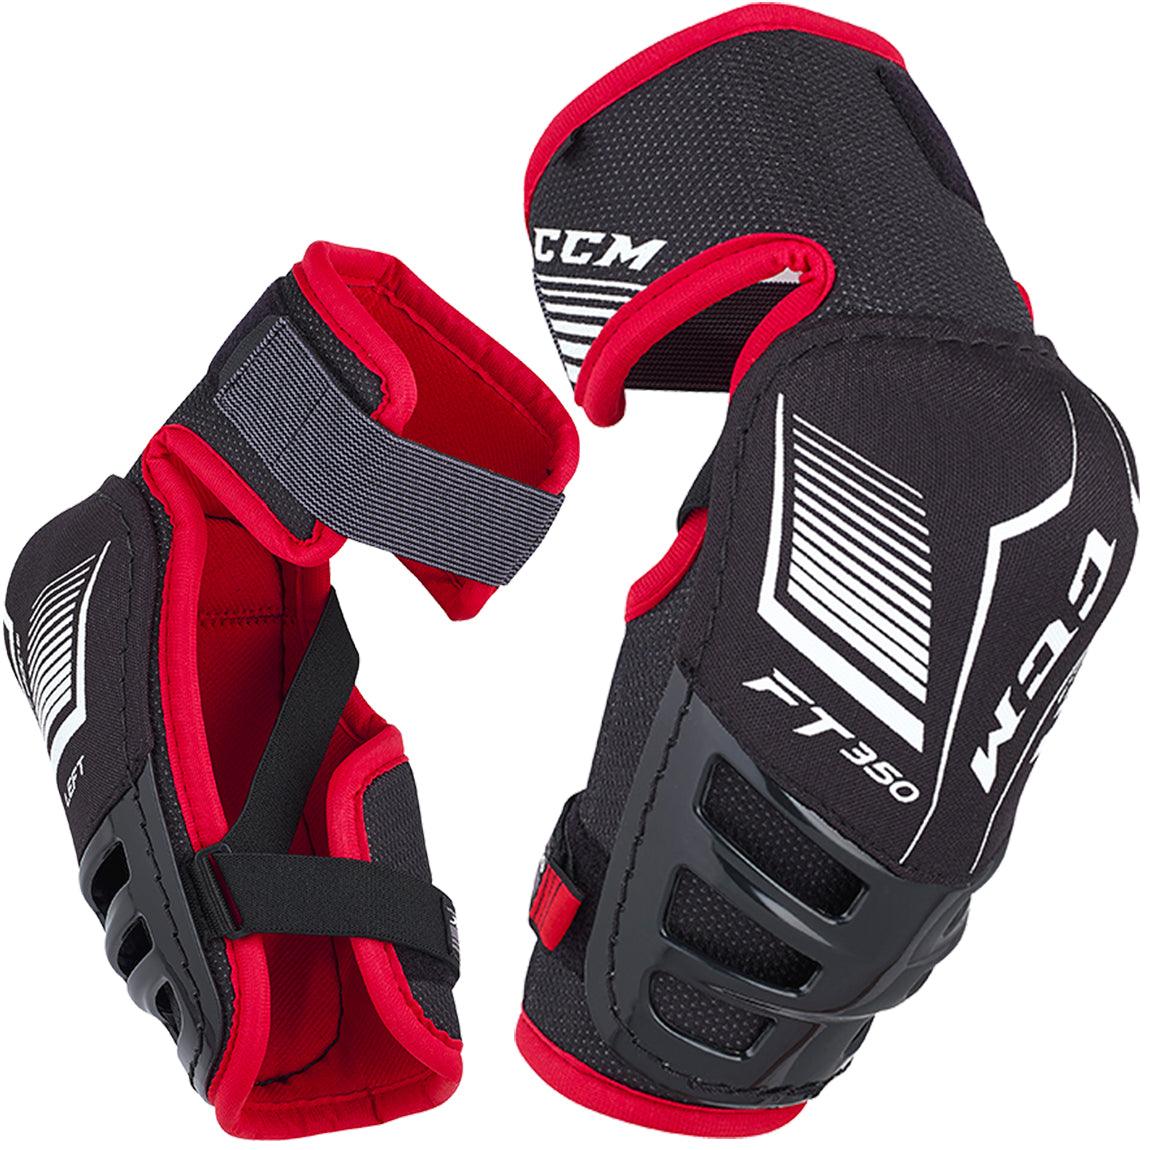 JetSpeed FT350 Elbow Pads - Senior - Sports Excellence